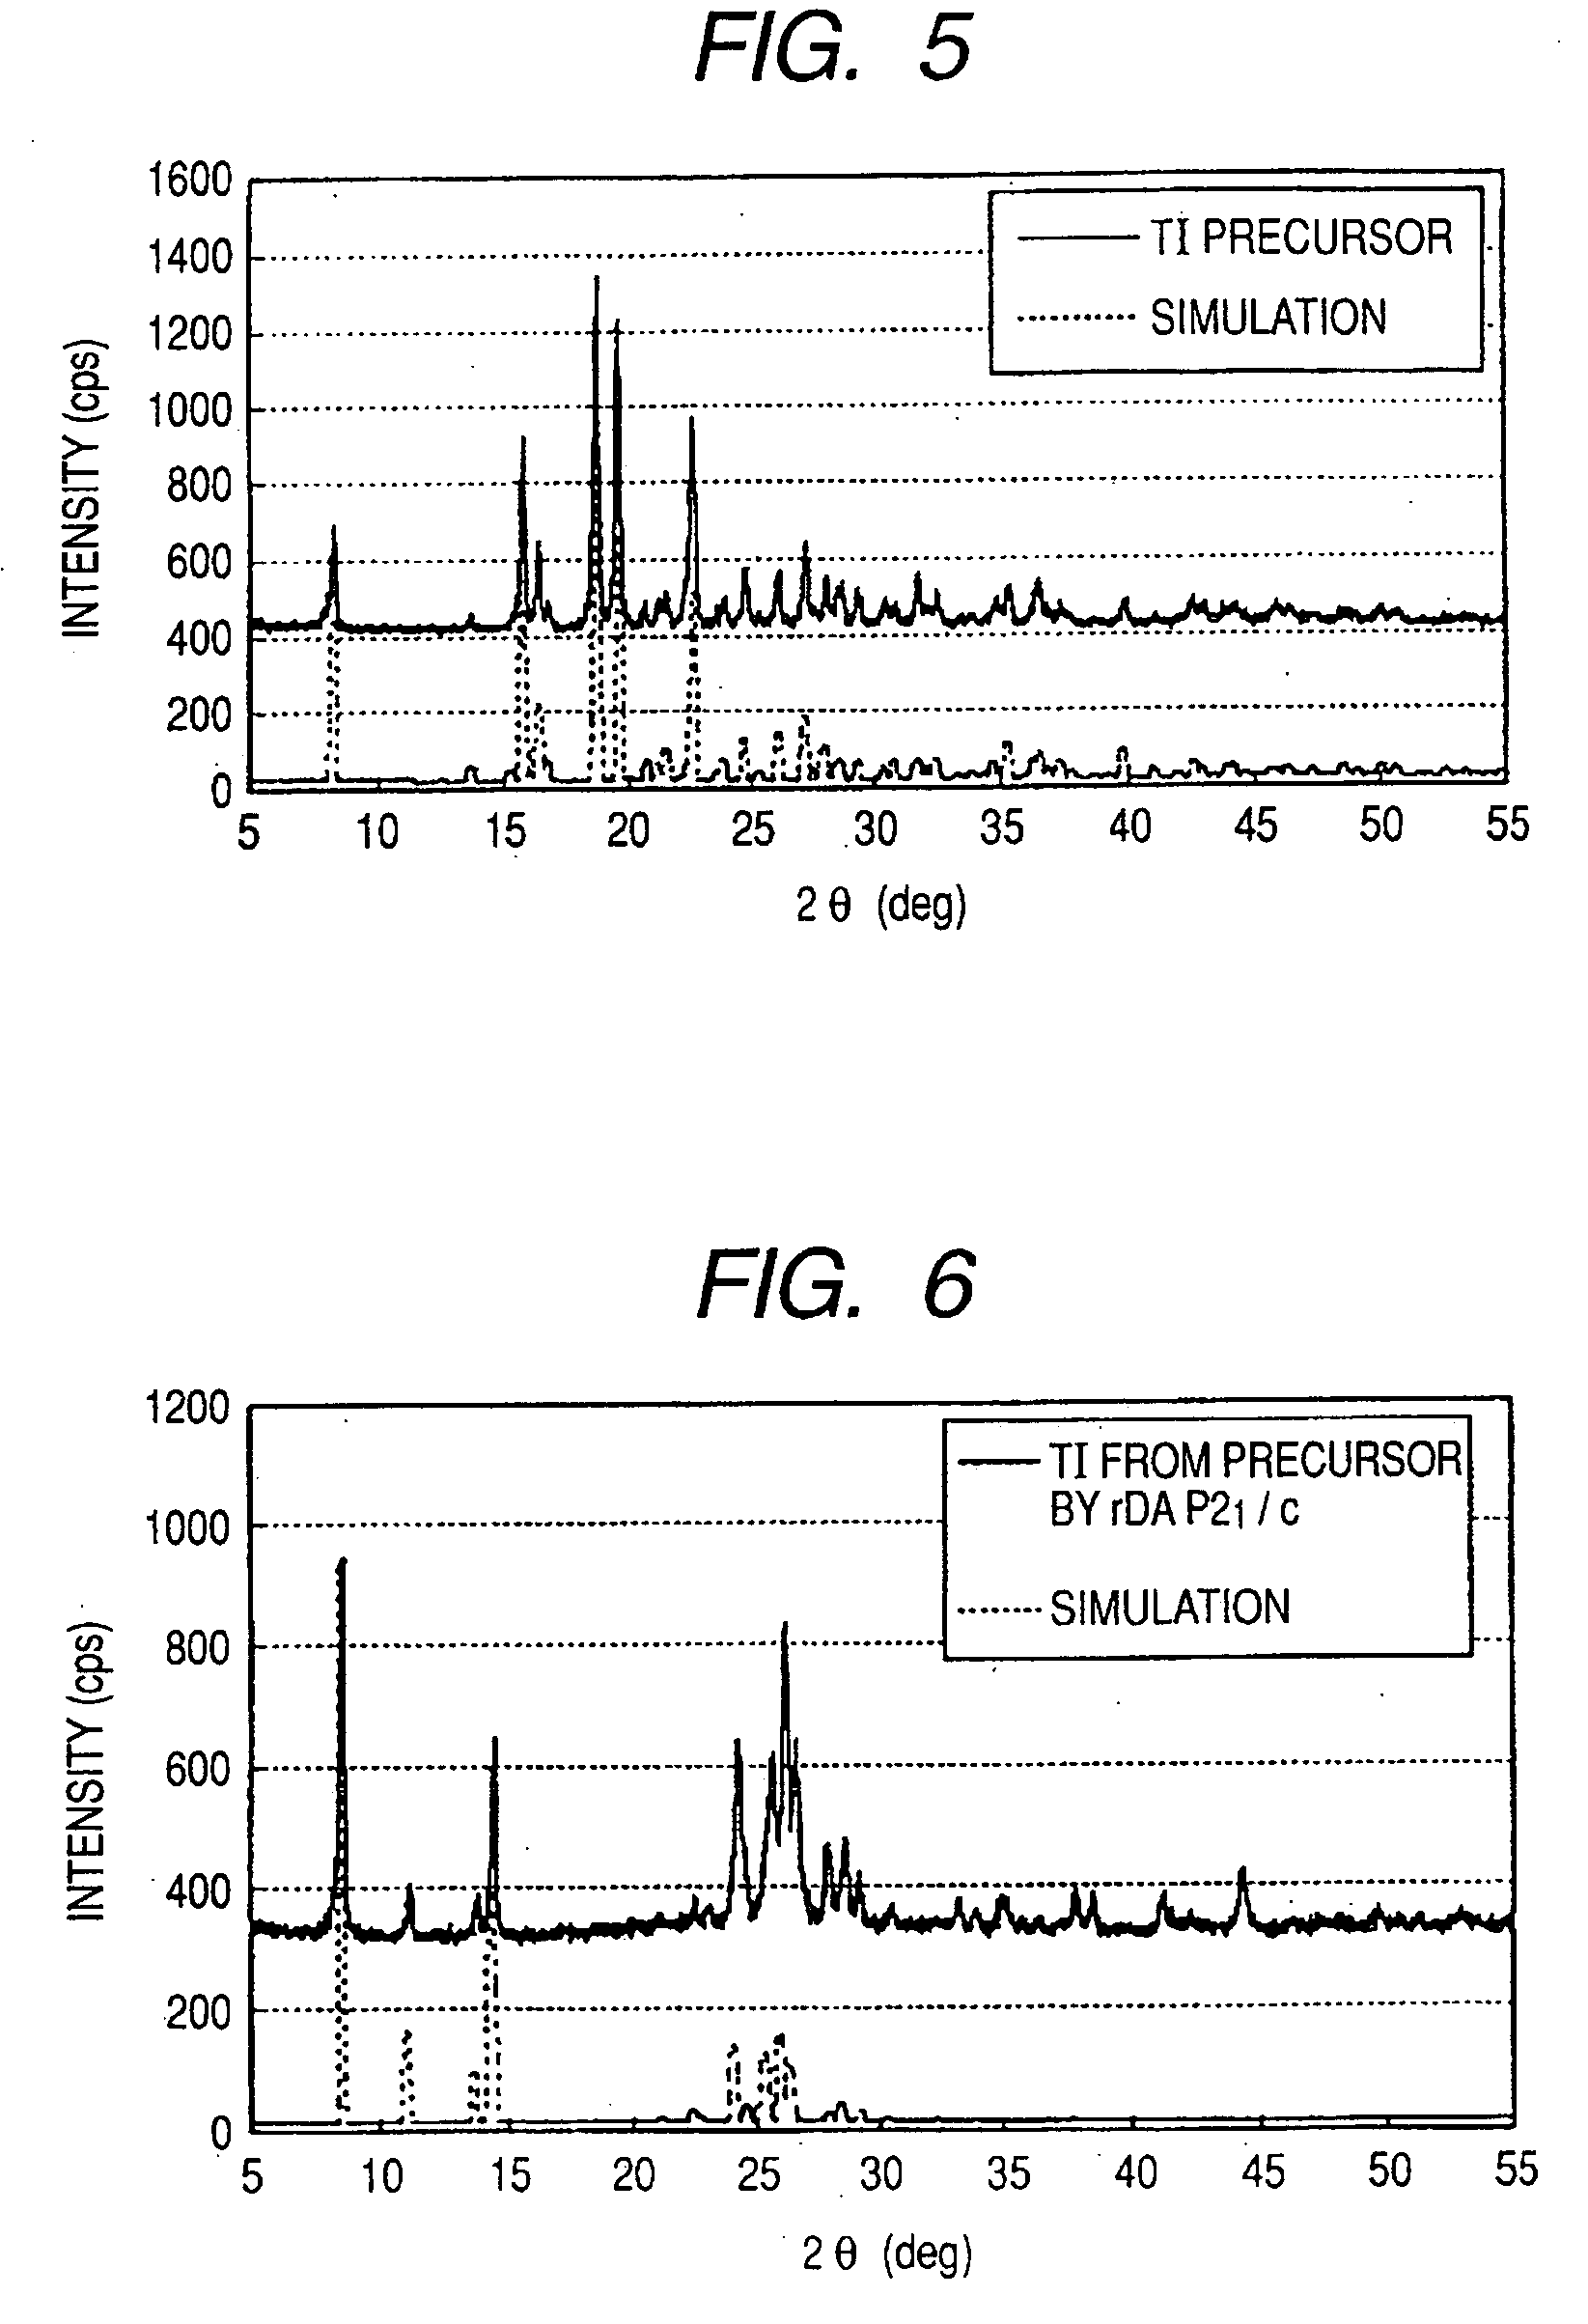 Intermediate chemical substance in the production of pigment crystals, method for manufacturing pigment crystals using the same, and pigment crystal